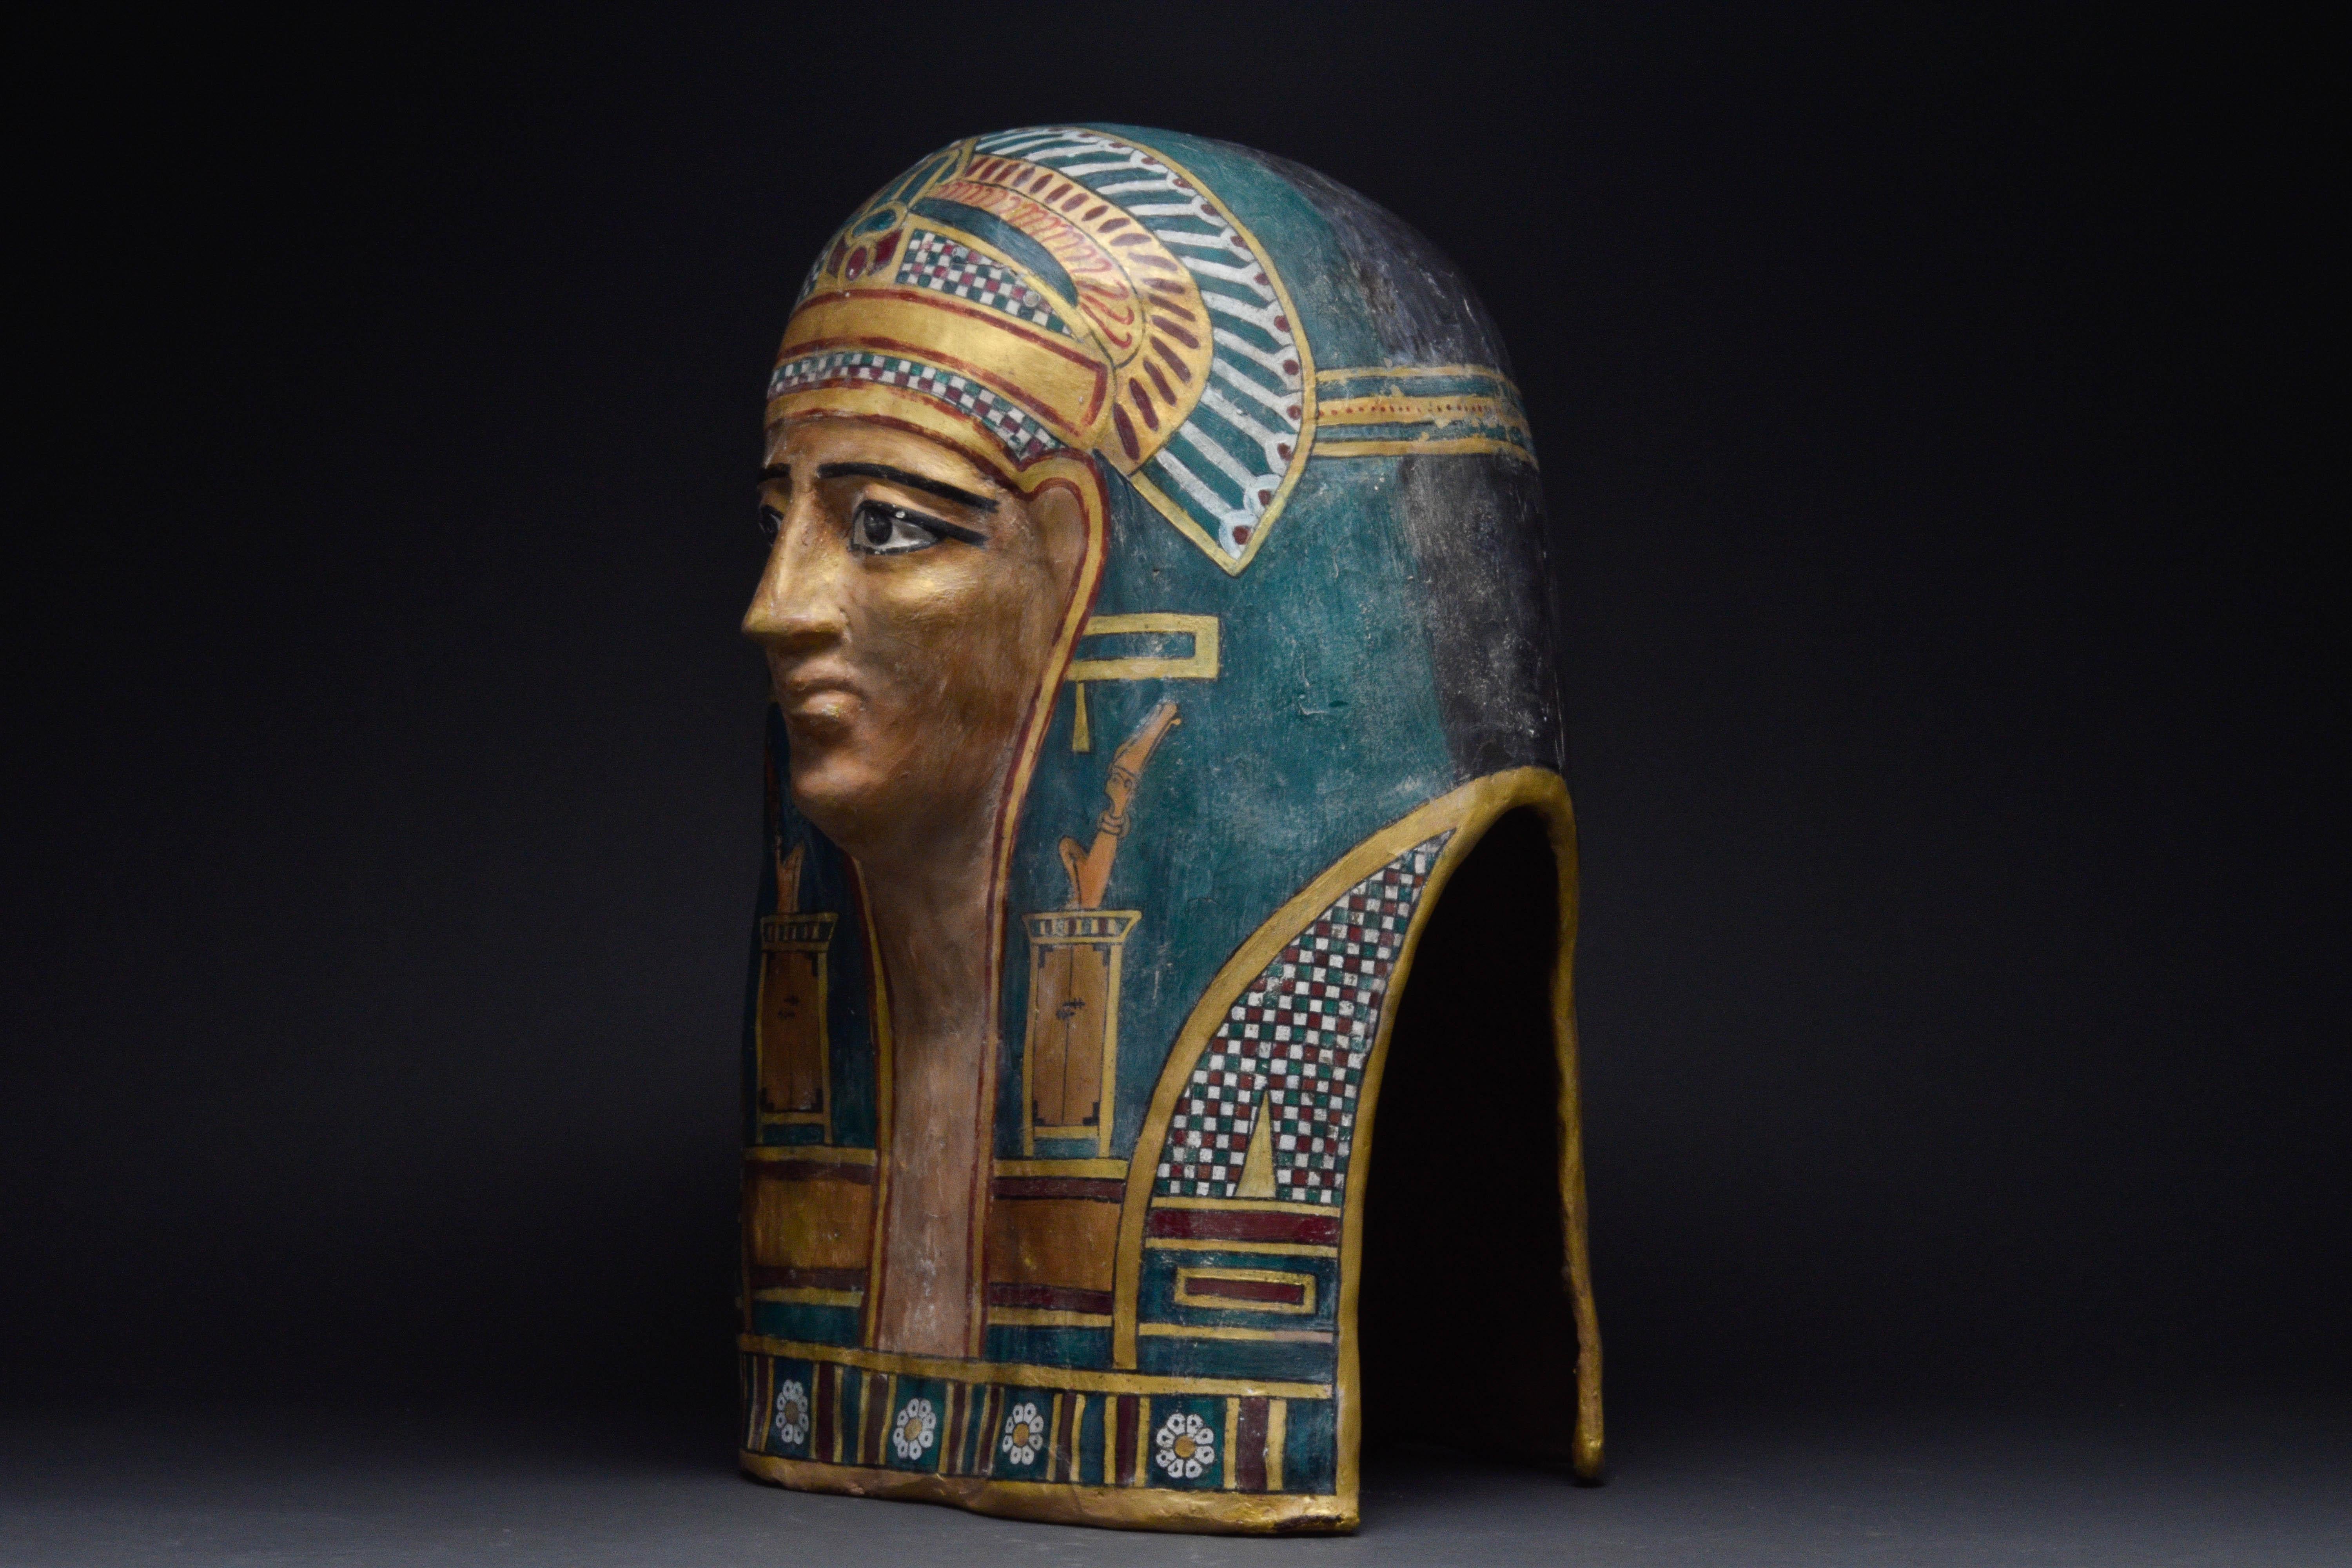 Ca. 332-30 BC. 

Highly Decorative, large, Ptolemaic Period, Egyptian, Cartonnage Mask depicting a face wearing a tripartite wig, the lappets falling gently behind the ears to the level of the chest. These lappets, now painted a turquoise blue